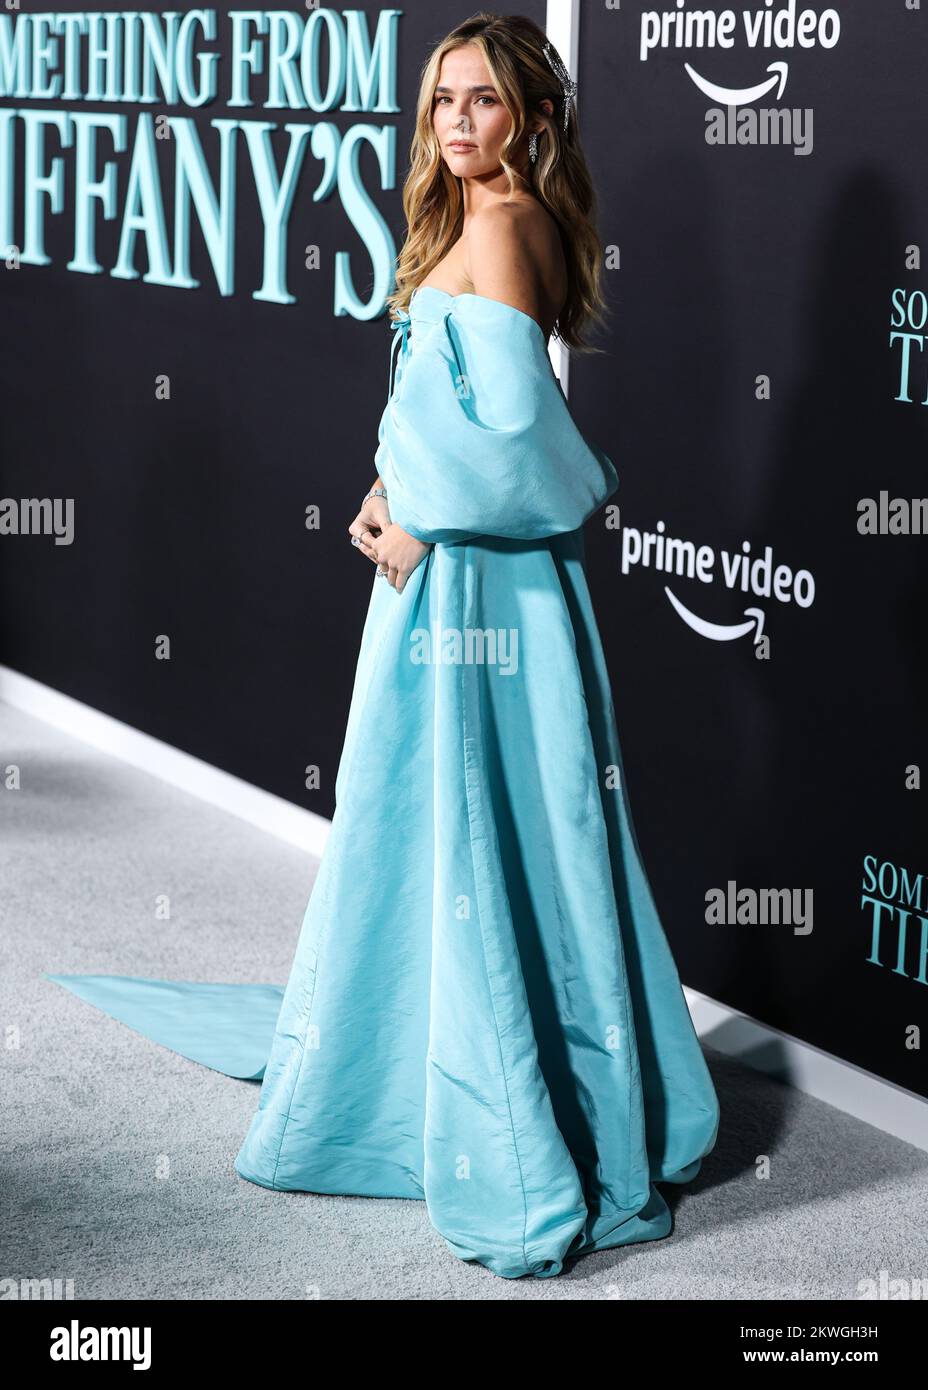 Century City, United States. 29th Nov, 2022. CENTURY CITY, LOS ANGELES, CALIFORNIA, USA - NOVEMBER 29: American actress Zoey Deutch wearing a Tiffany blue Carolina Herrera dress with Tiffany and Co. jewelry arrives at the Los Angeles Premiere Of Amazon Prime Video's 'Something From Tiffany's' held at AMC Century City 15 at Westfield Century City on November 29, 2022 in Century City, Los Angeles, California, United States. (Photo by Xavier Collin/Image Press Agency) Credit: Image Press Agency/Alamy Live News Stock Photo